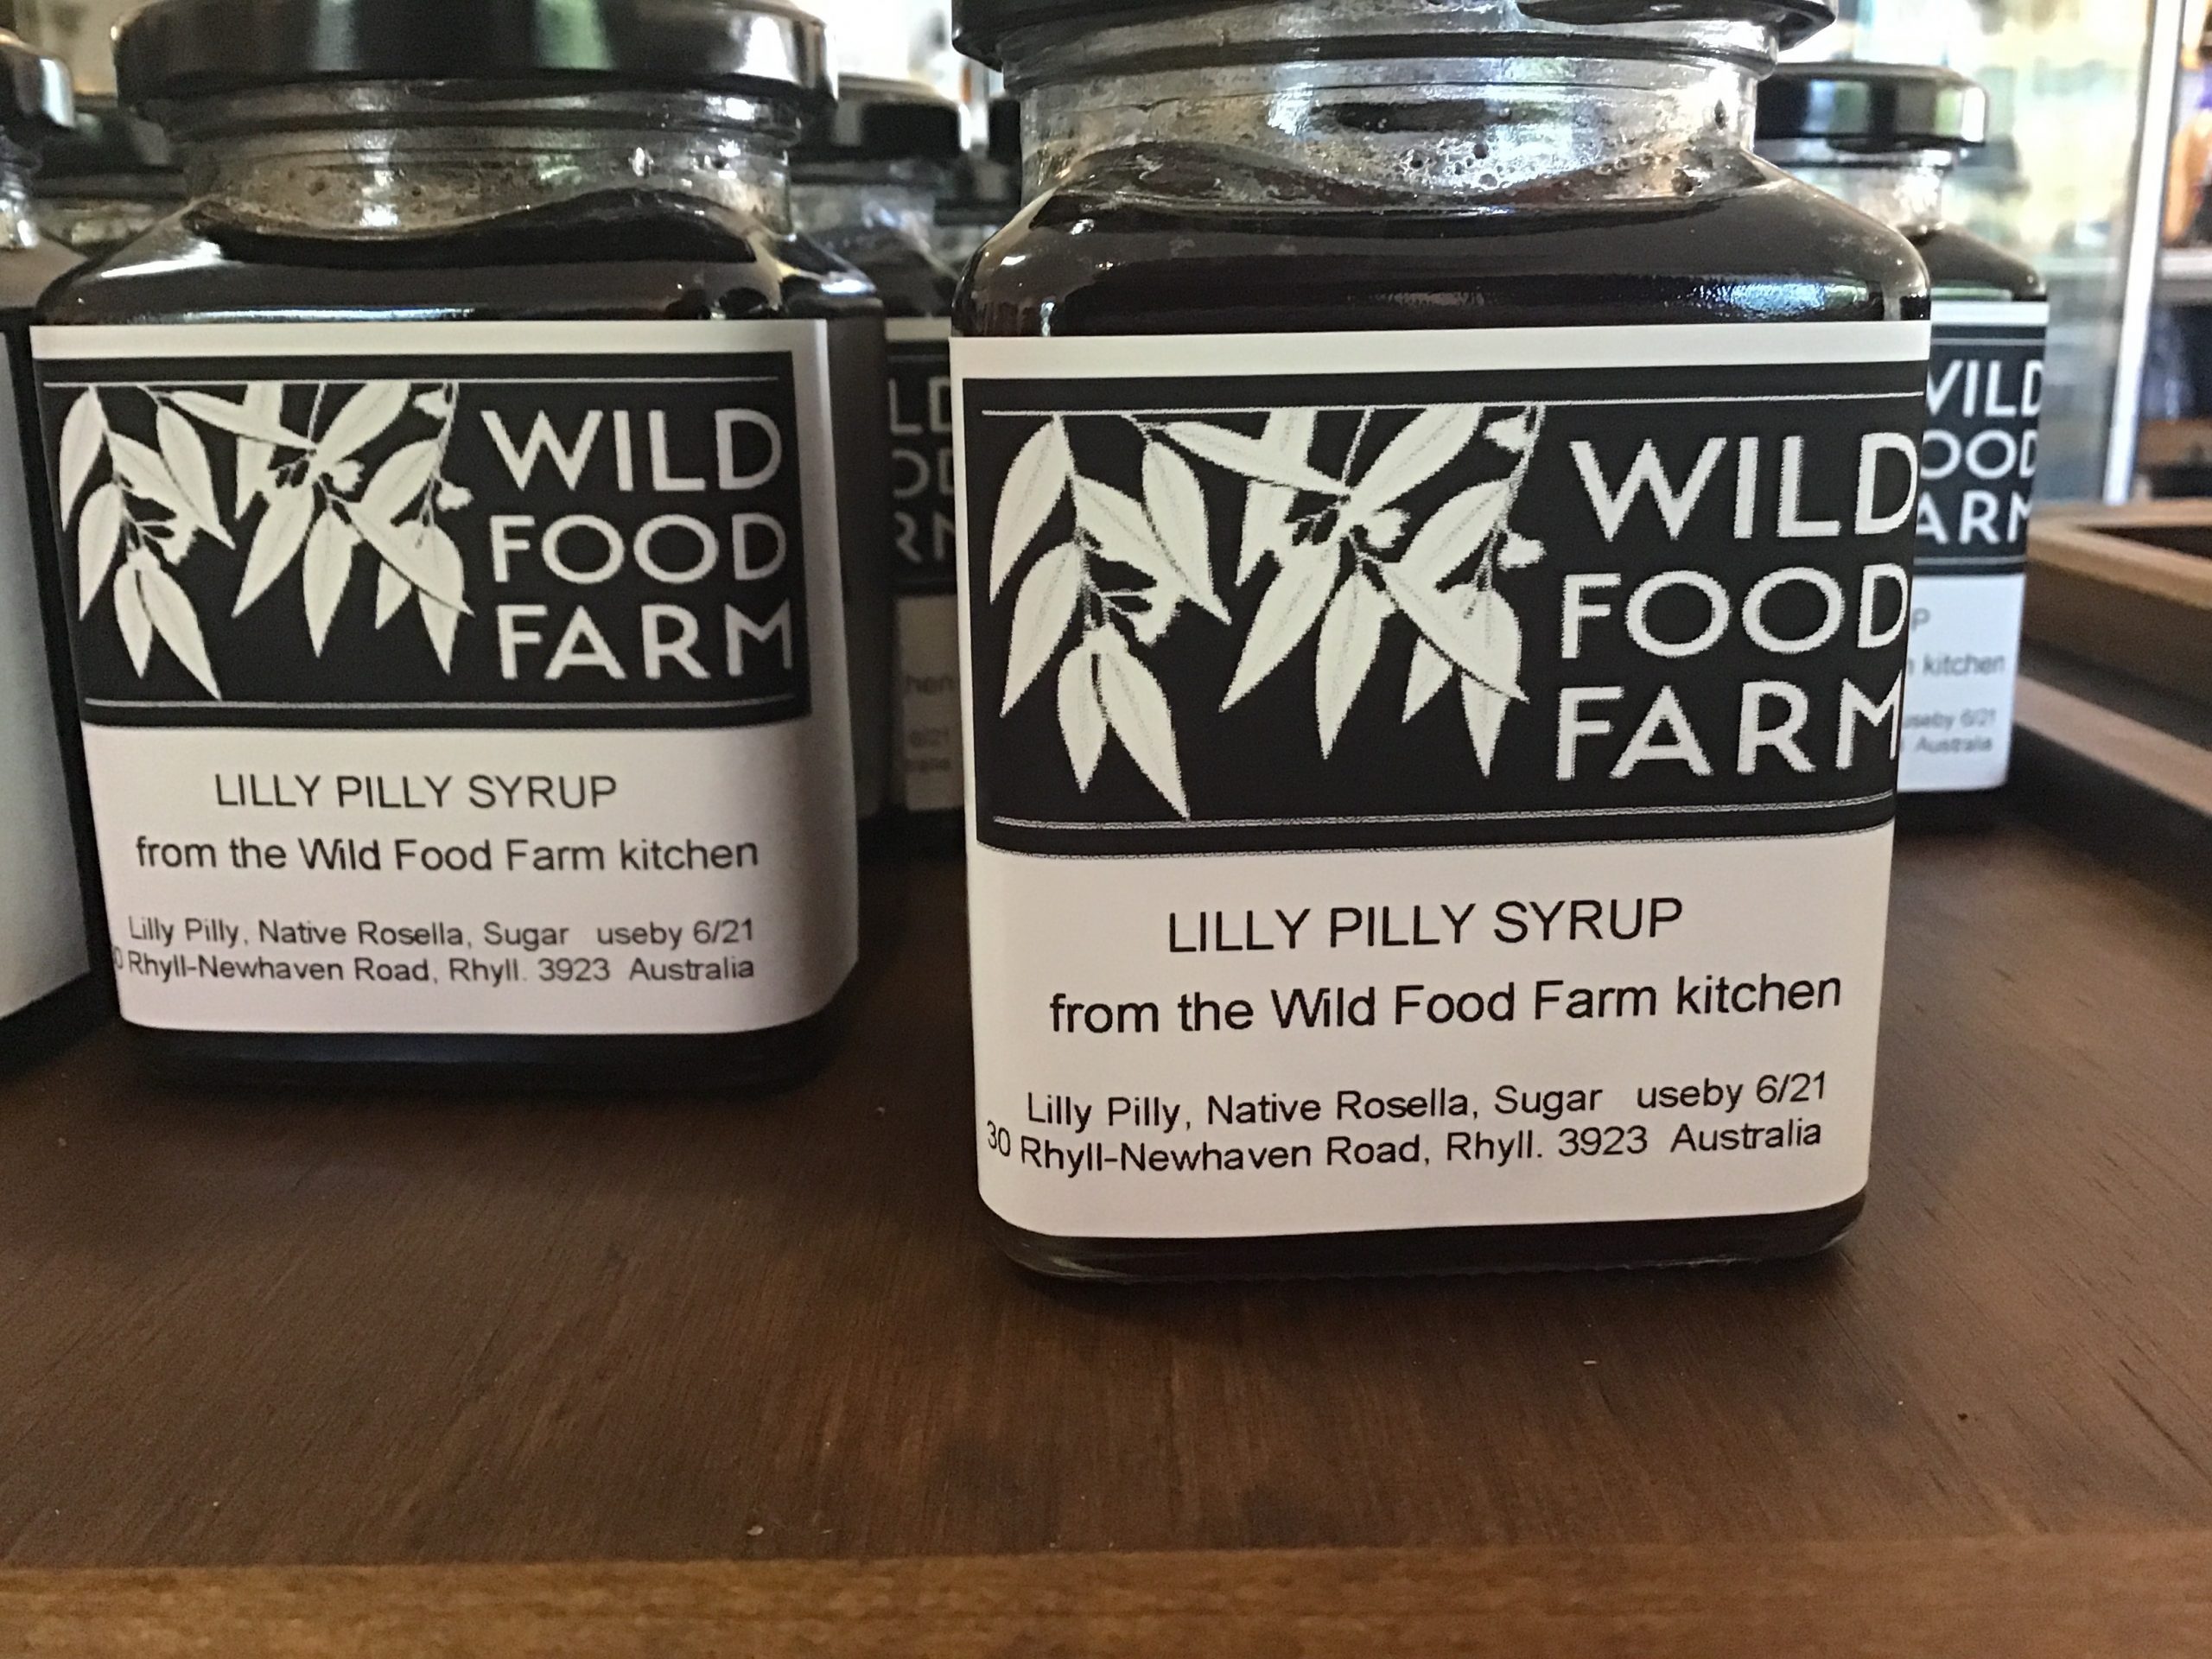 Lilli Pilli syrup made in the kitchen at the Wild Food Farm